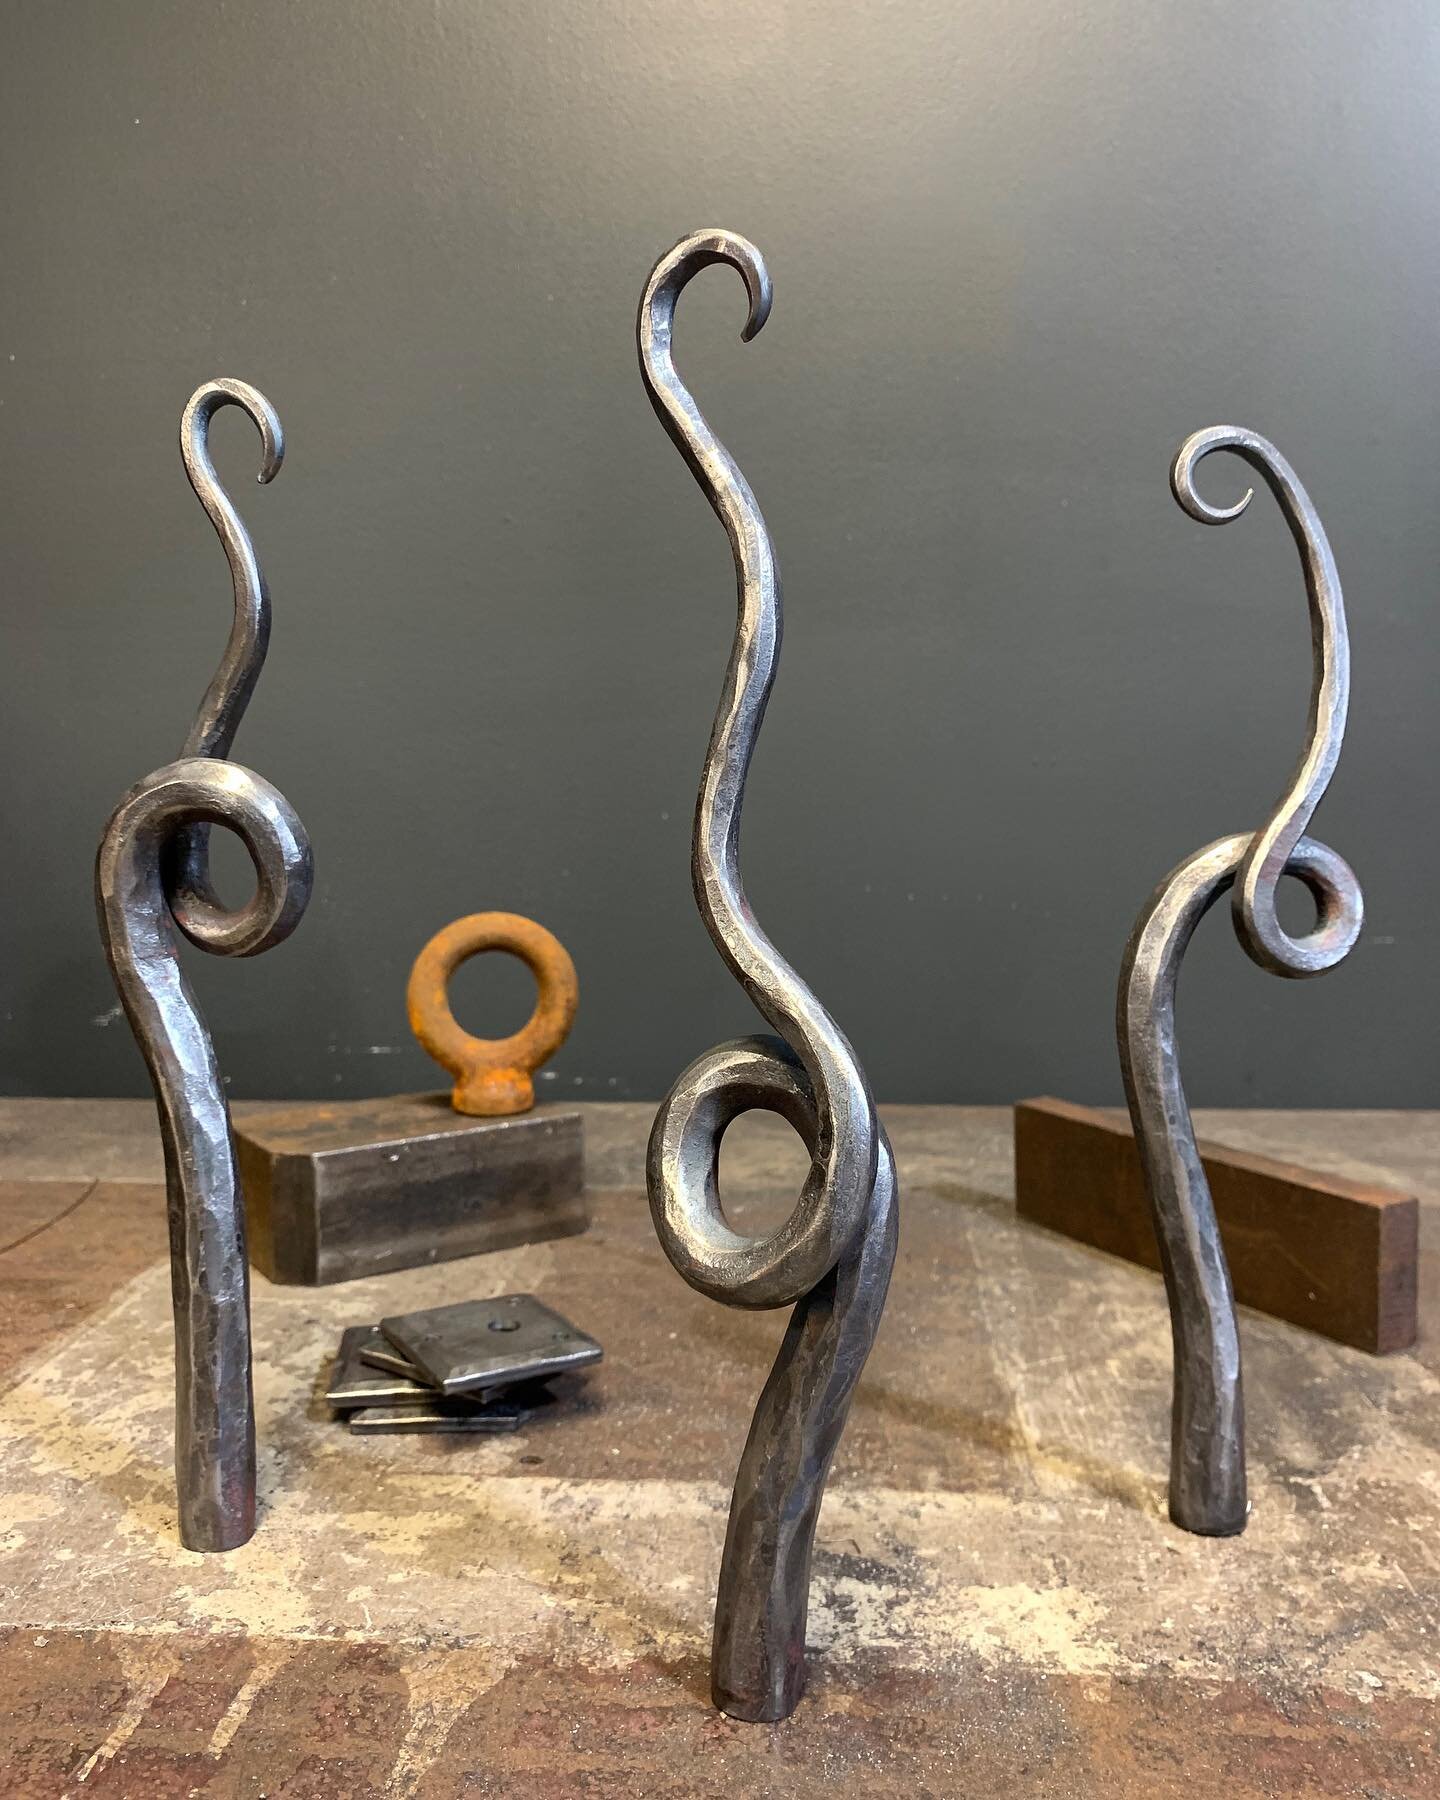 Land of the loops. 
.
.
.
I&rsquo;m super psyched to be making vine-y hooks for someone to use for #espalier on their #lemontree! Espaliate? Probably not&hellip;
.
.
#forged #steel #loopy #long #bananahooks
.
#walkawayhouse